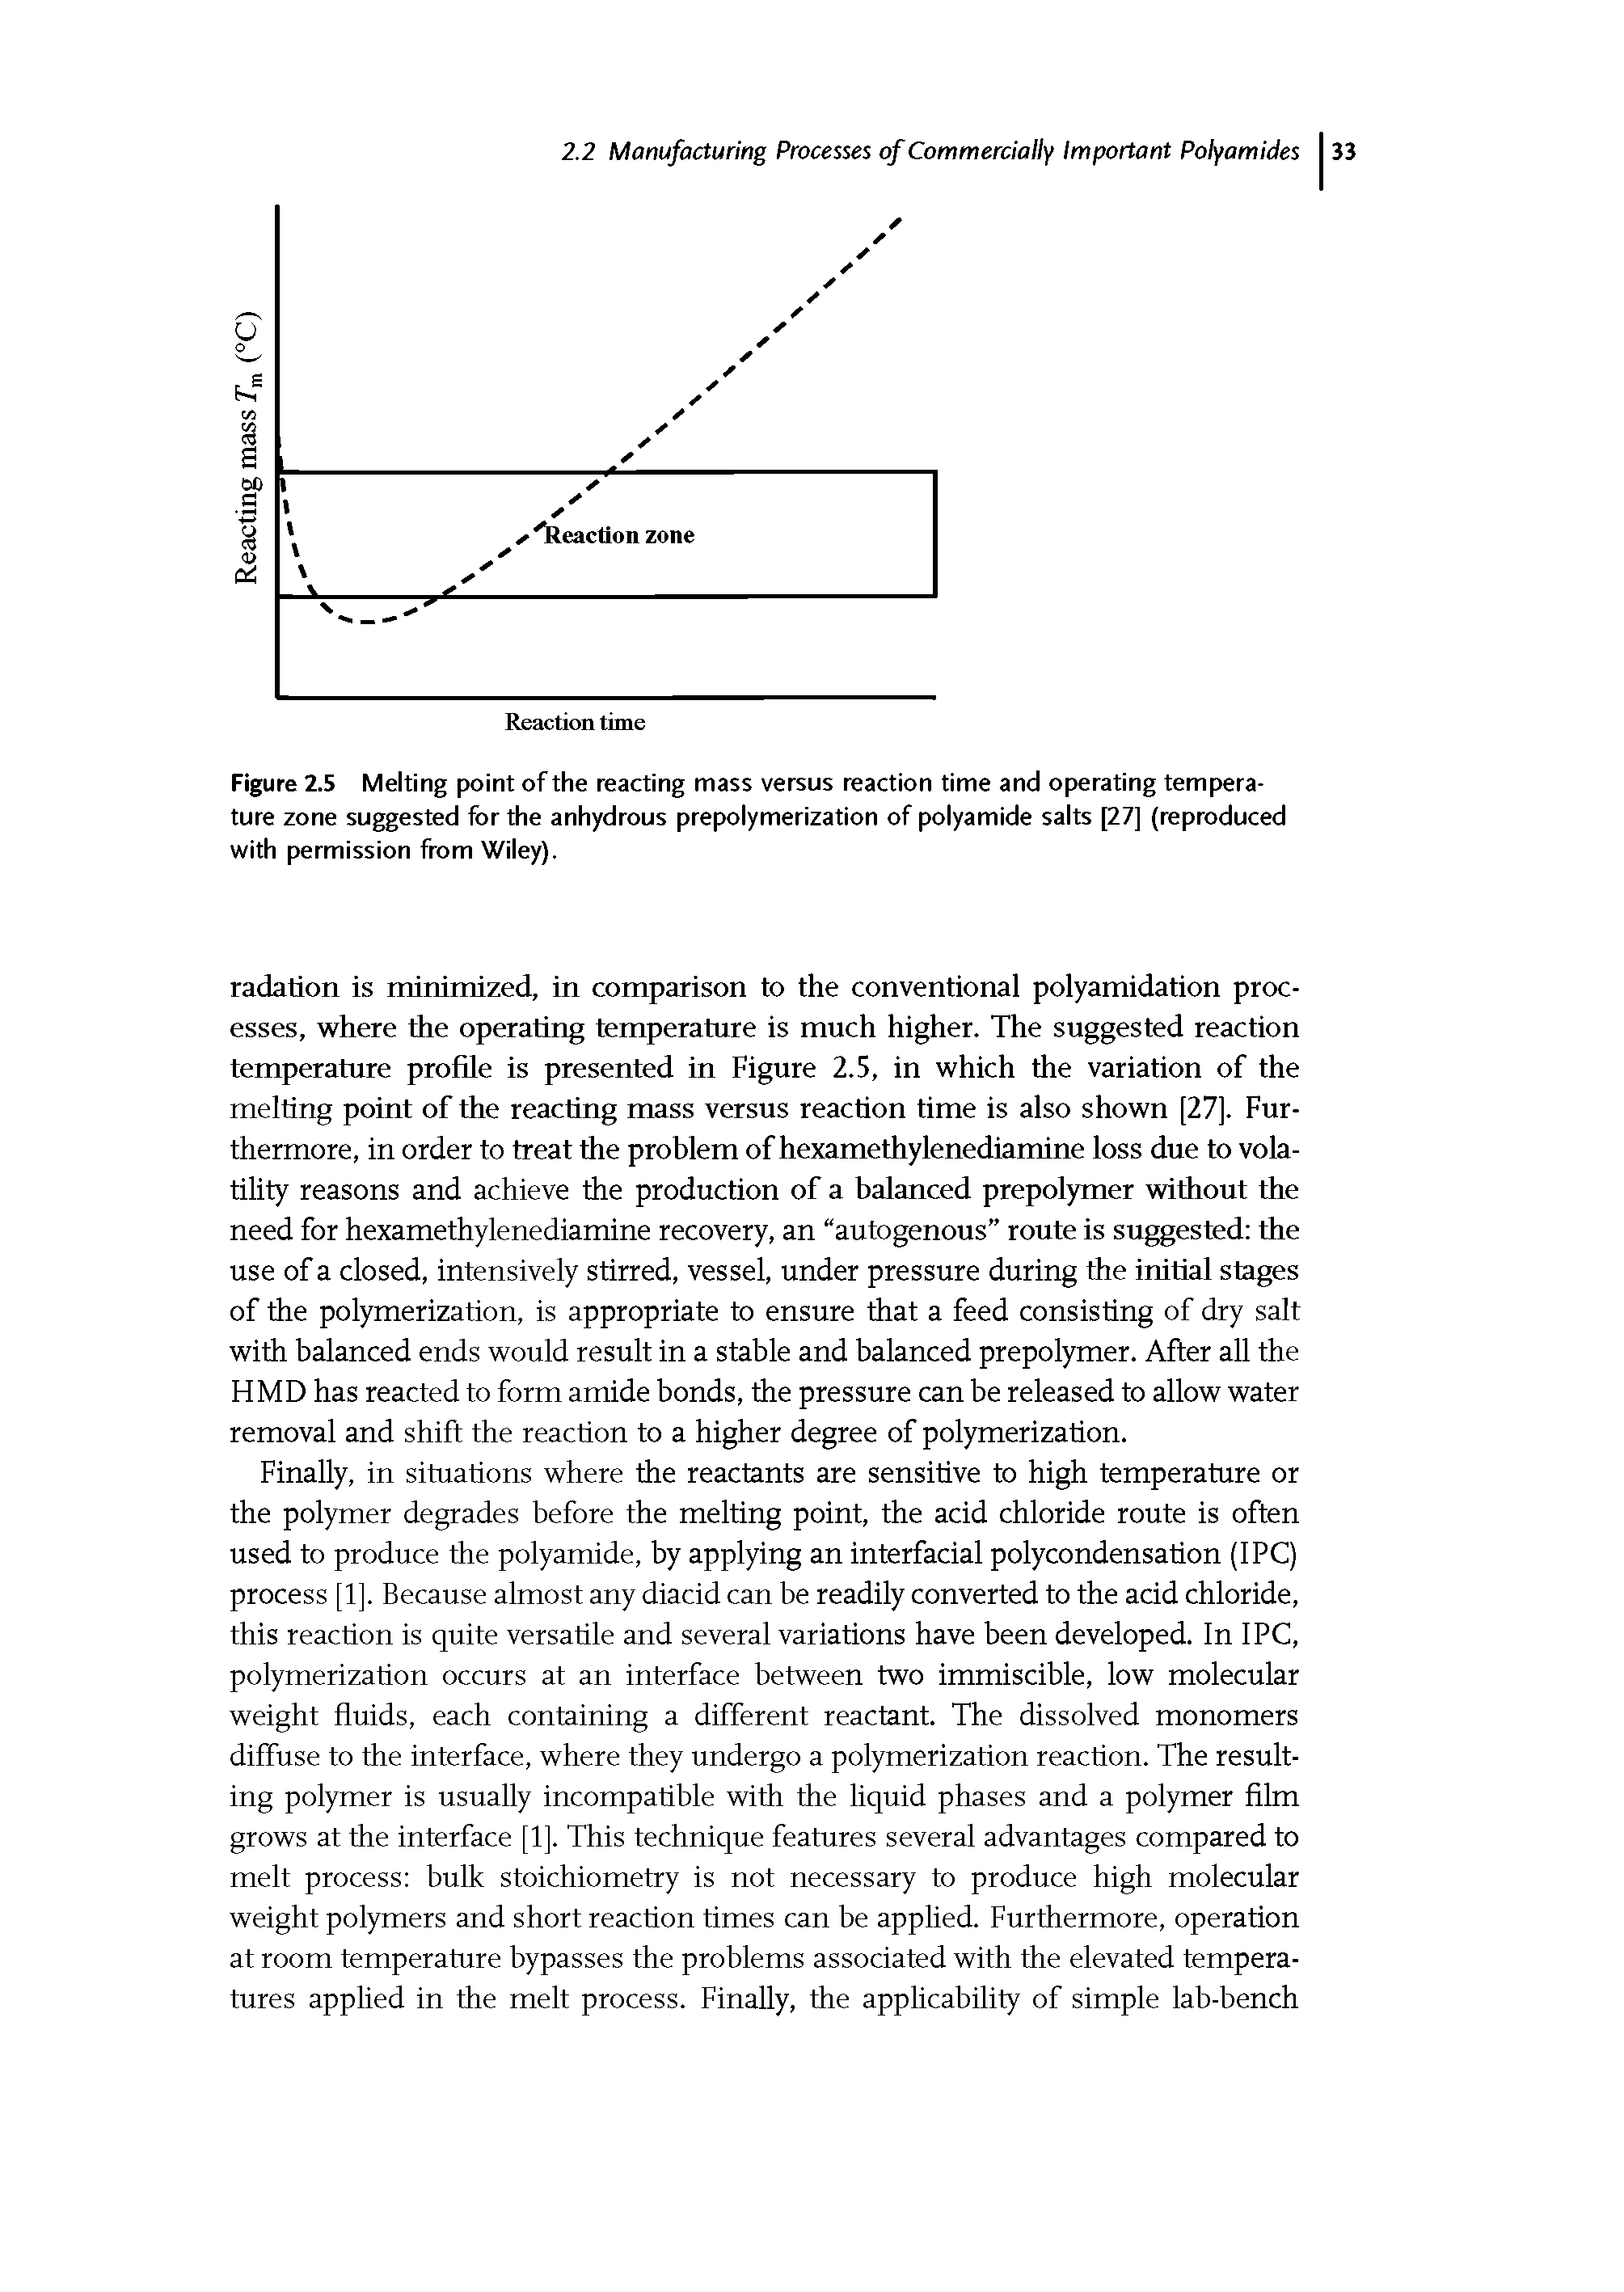 Figure 2.5 Melting point of the reacting mass versus reaction time and operating temperature zone su ested for the anhydrous prepolymerization of polyamide salts [27] (reproduced with permission from Wiley).